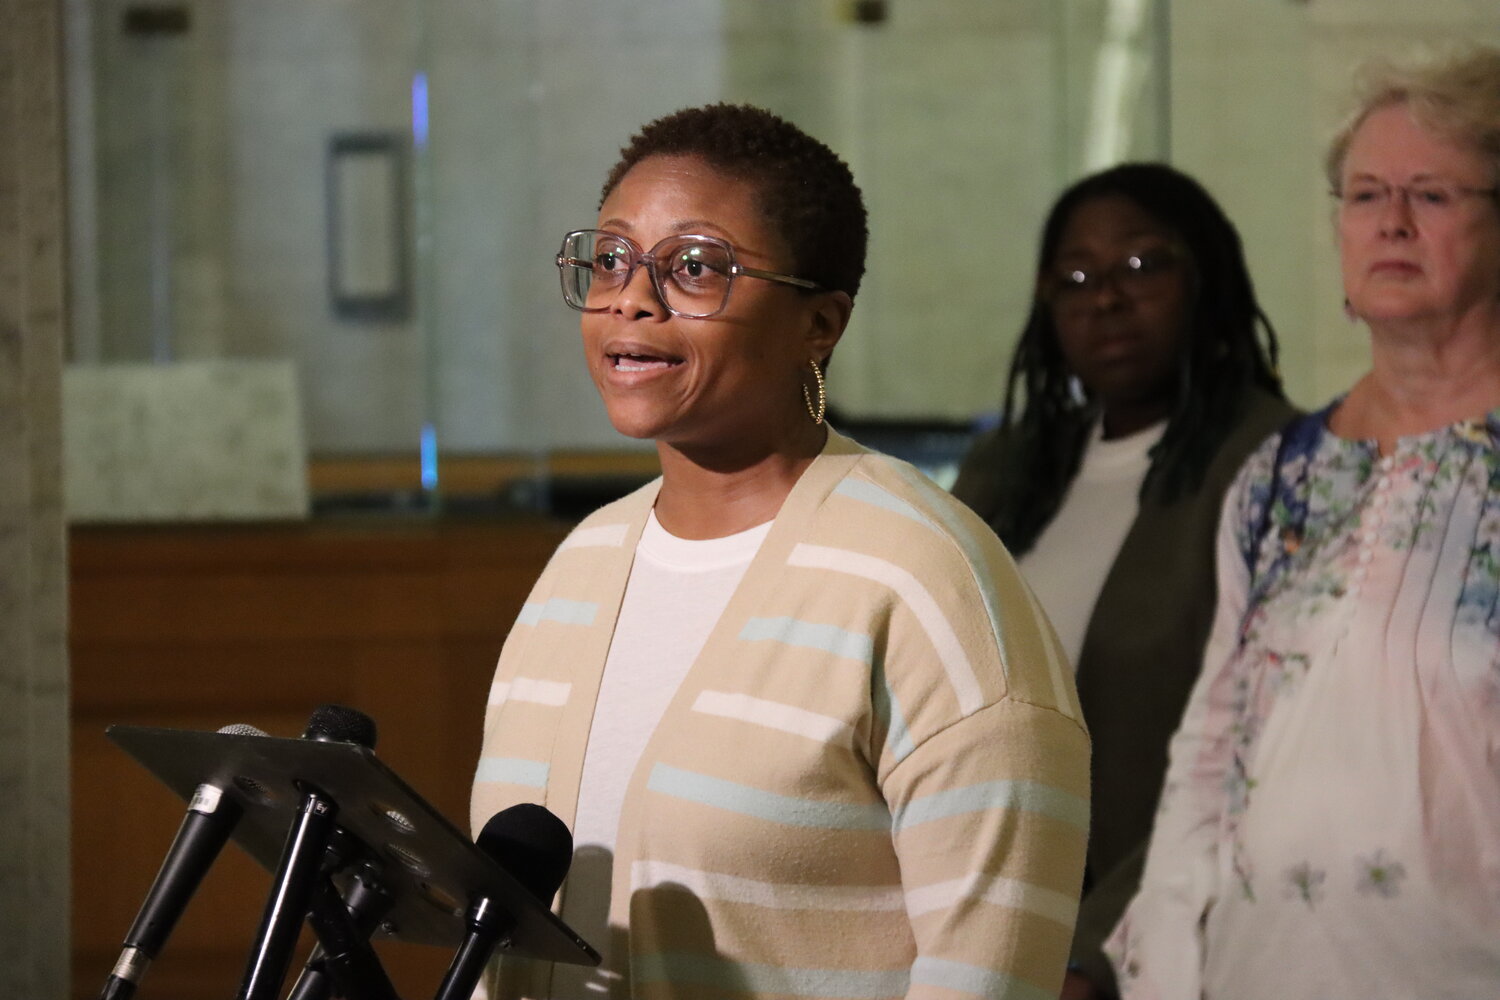 Tabitha Montgomery of Powderhorn Park Neighborhood Association speaks at the Third Precinct press conference on May 16, 2023 at Minneapolis City Hall.